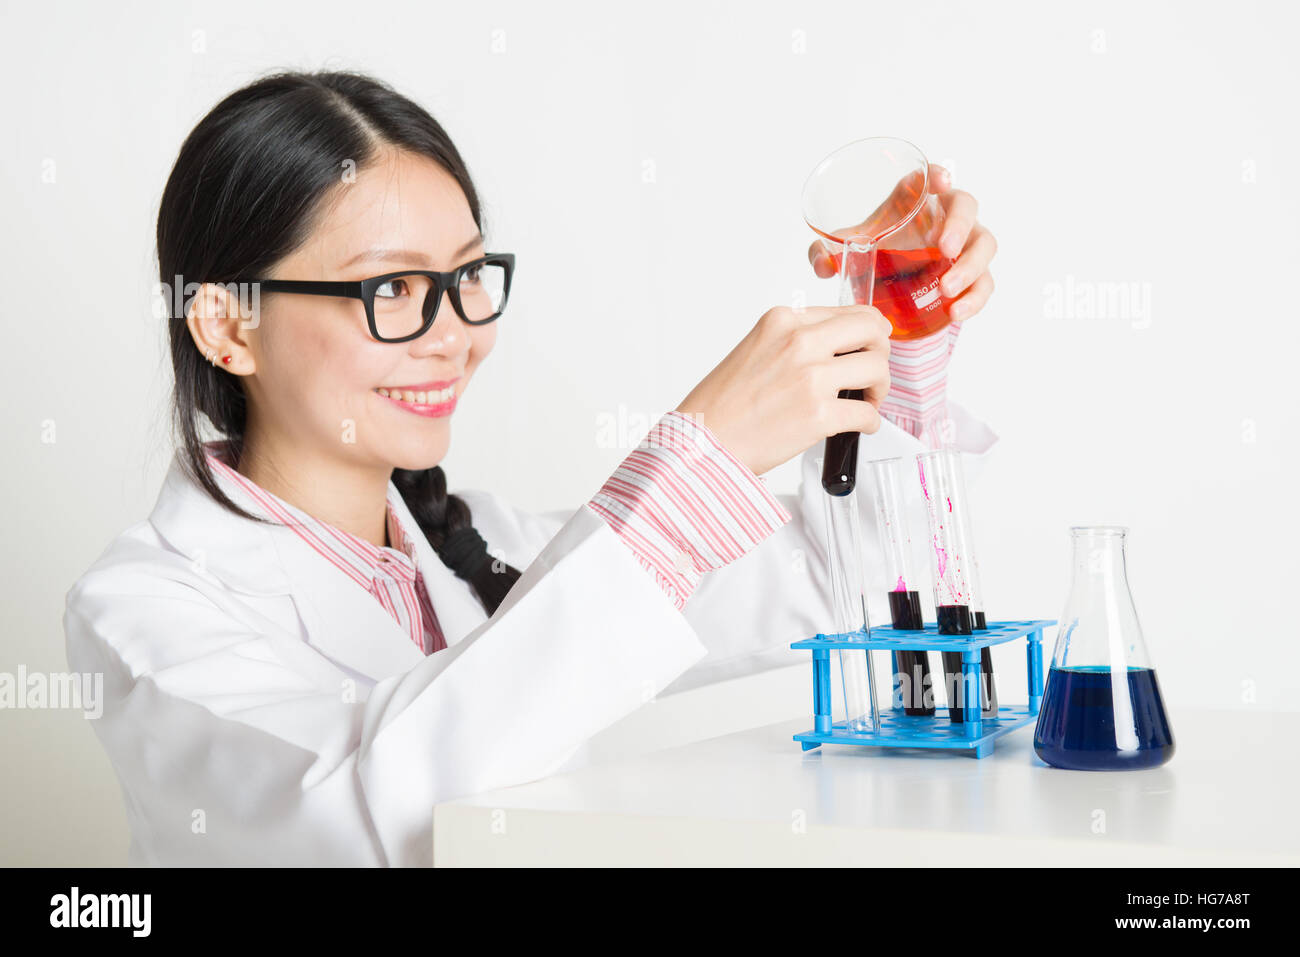 Portrait of smart and young Asian scientists doing experiment in the lab with chemistry liquid Stock Photo